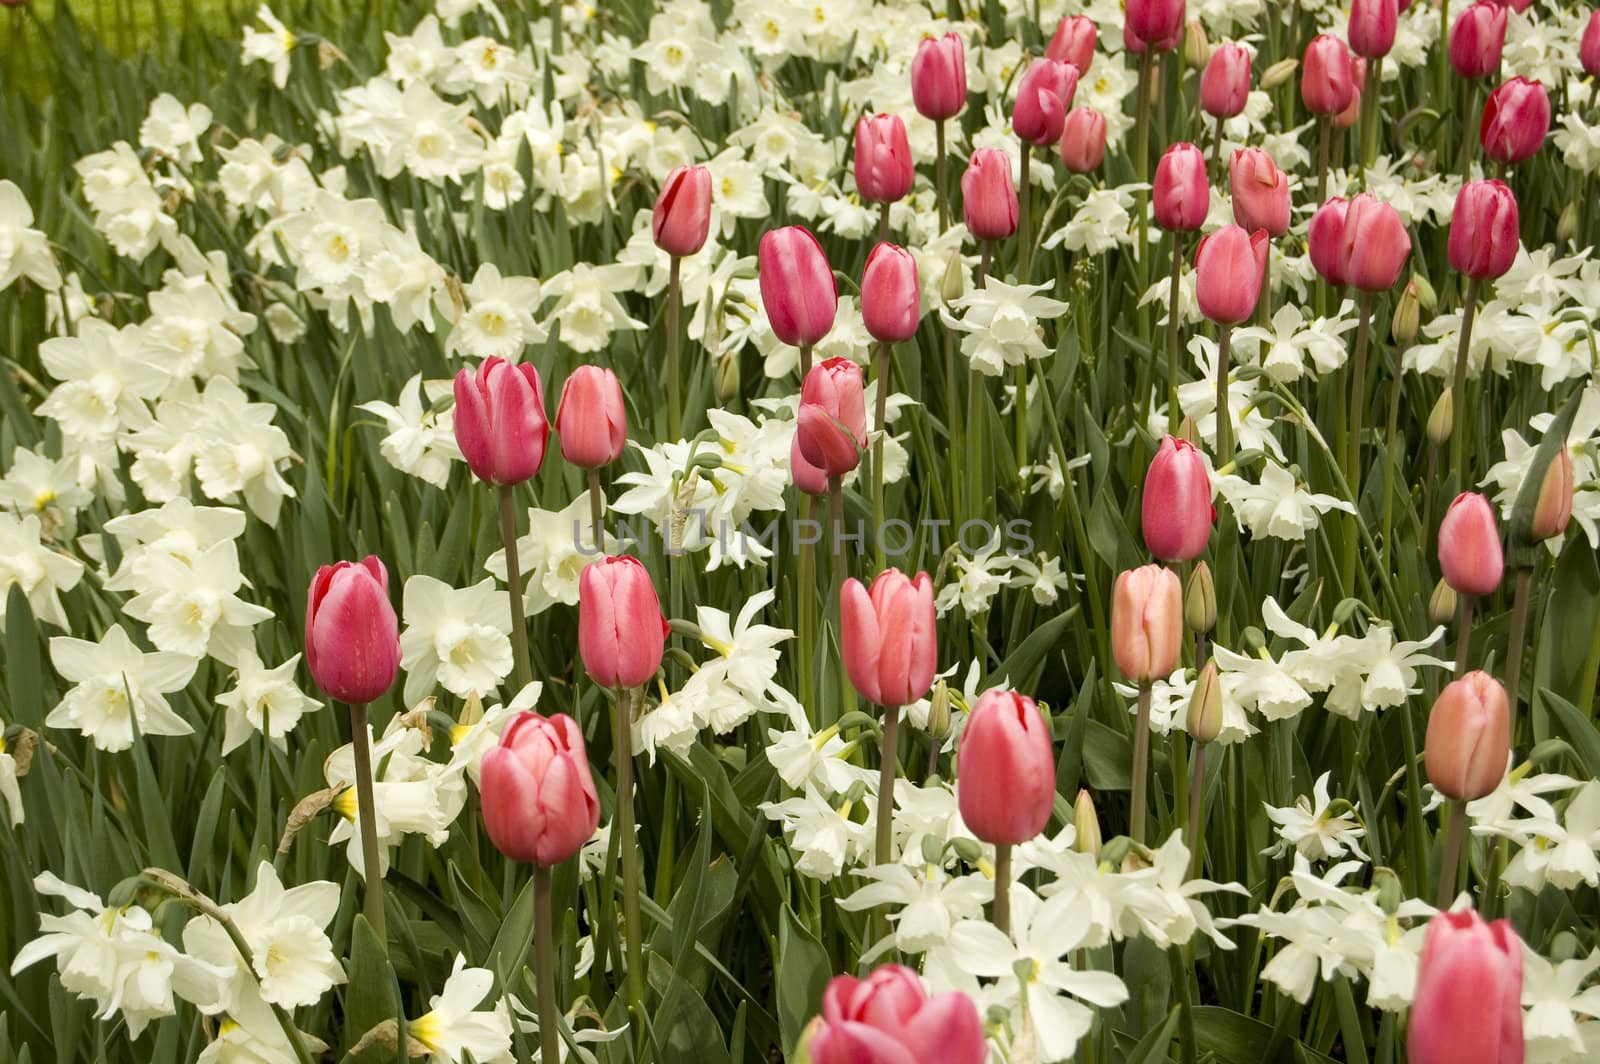 field of red tulips and white narcisses by ladyminnie